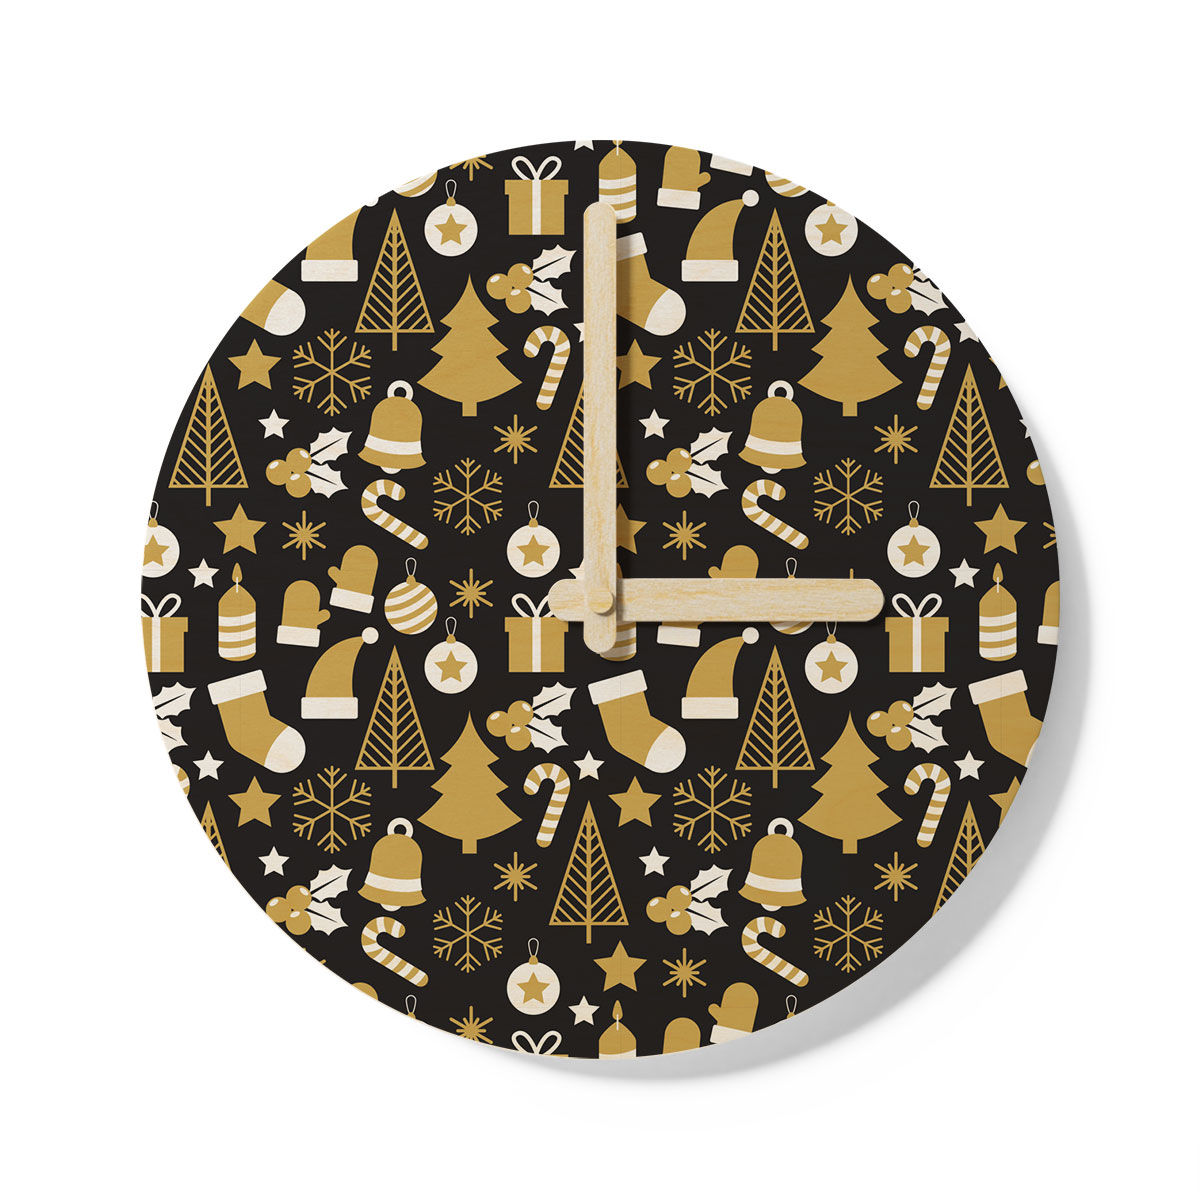 White And Gold Christmas Socks, Christmas Tree, Candy Cane On Black Background Wooden Wall Clock